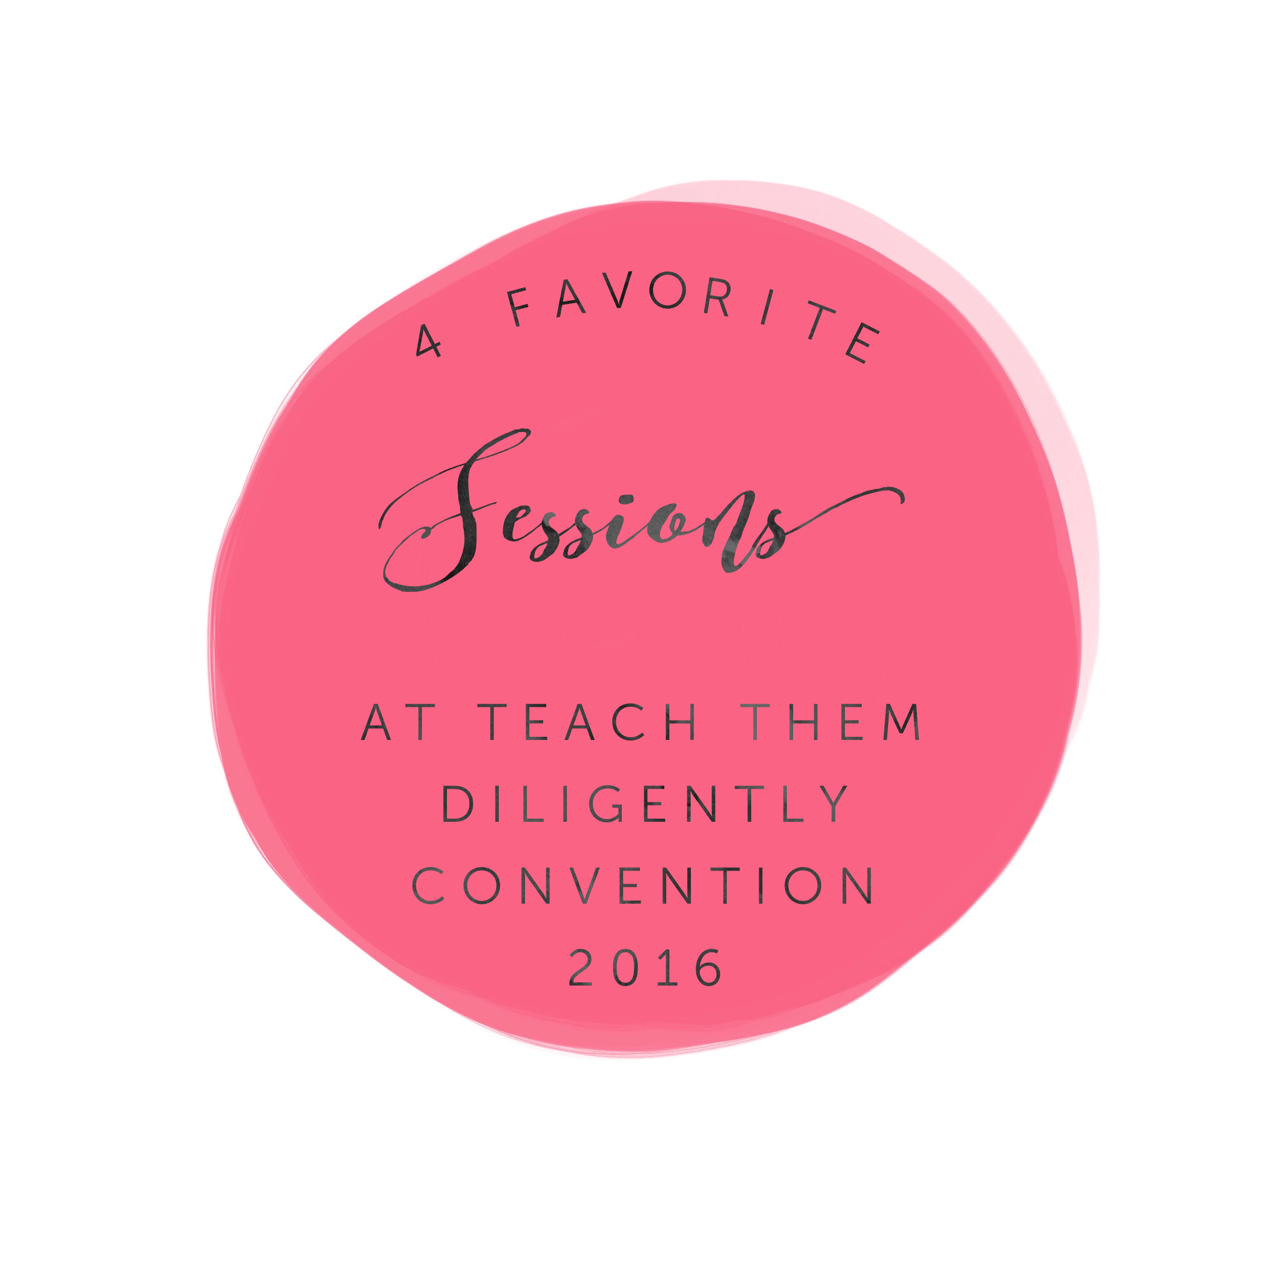 Top 4 Sessions at Teach Them Diligently Nashville 2016